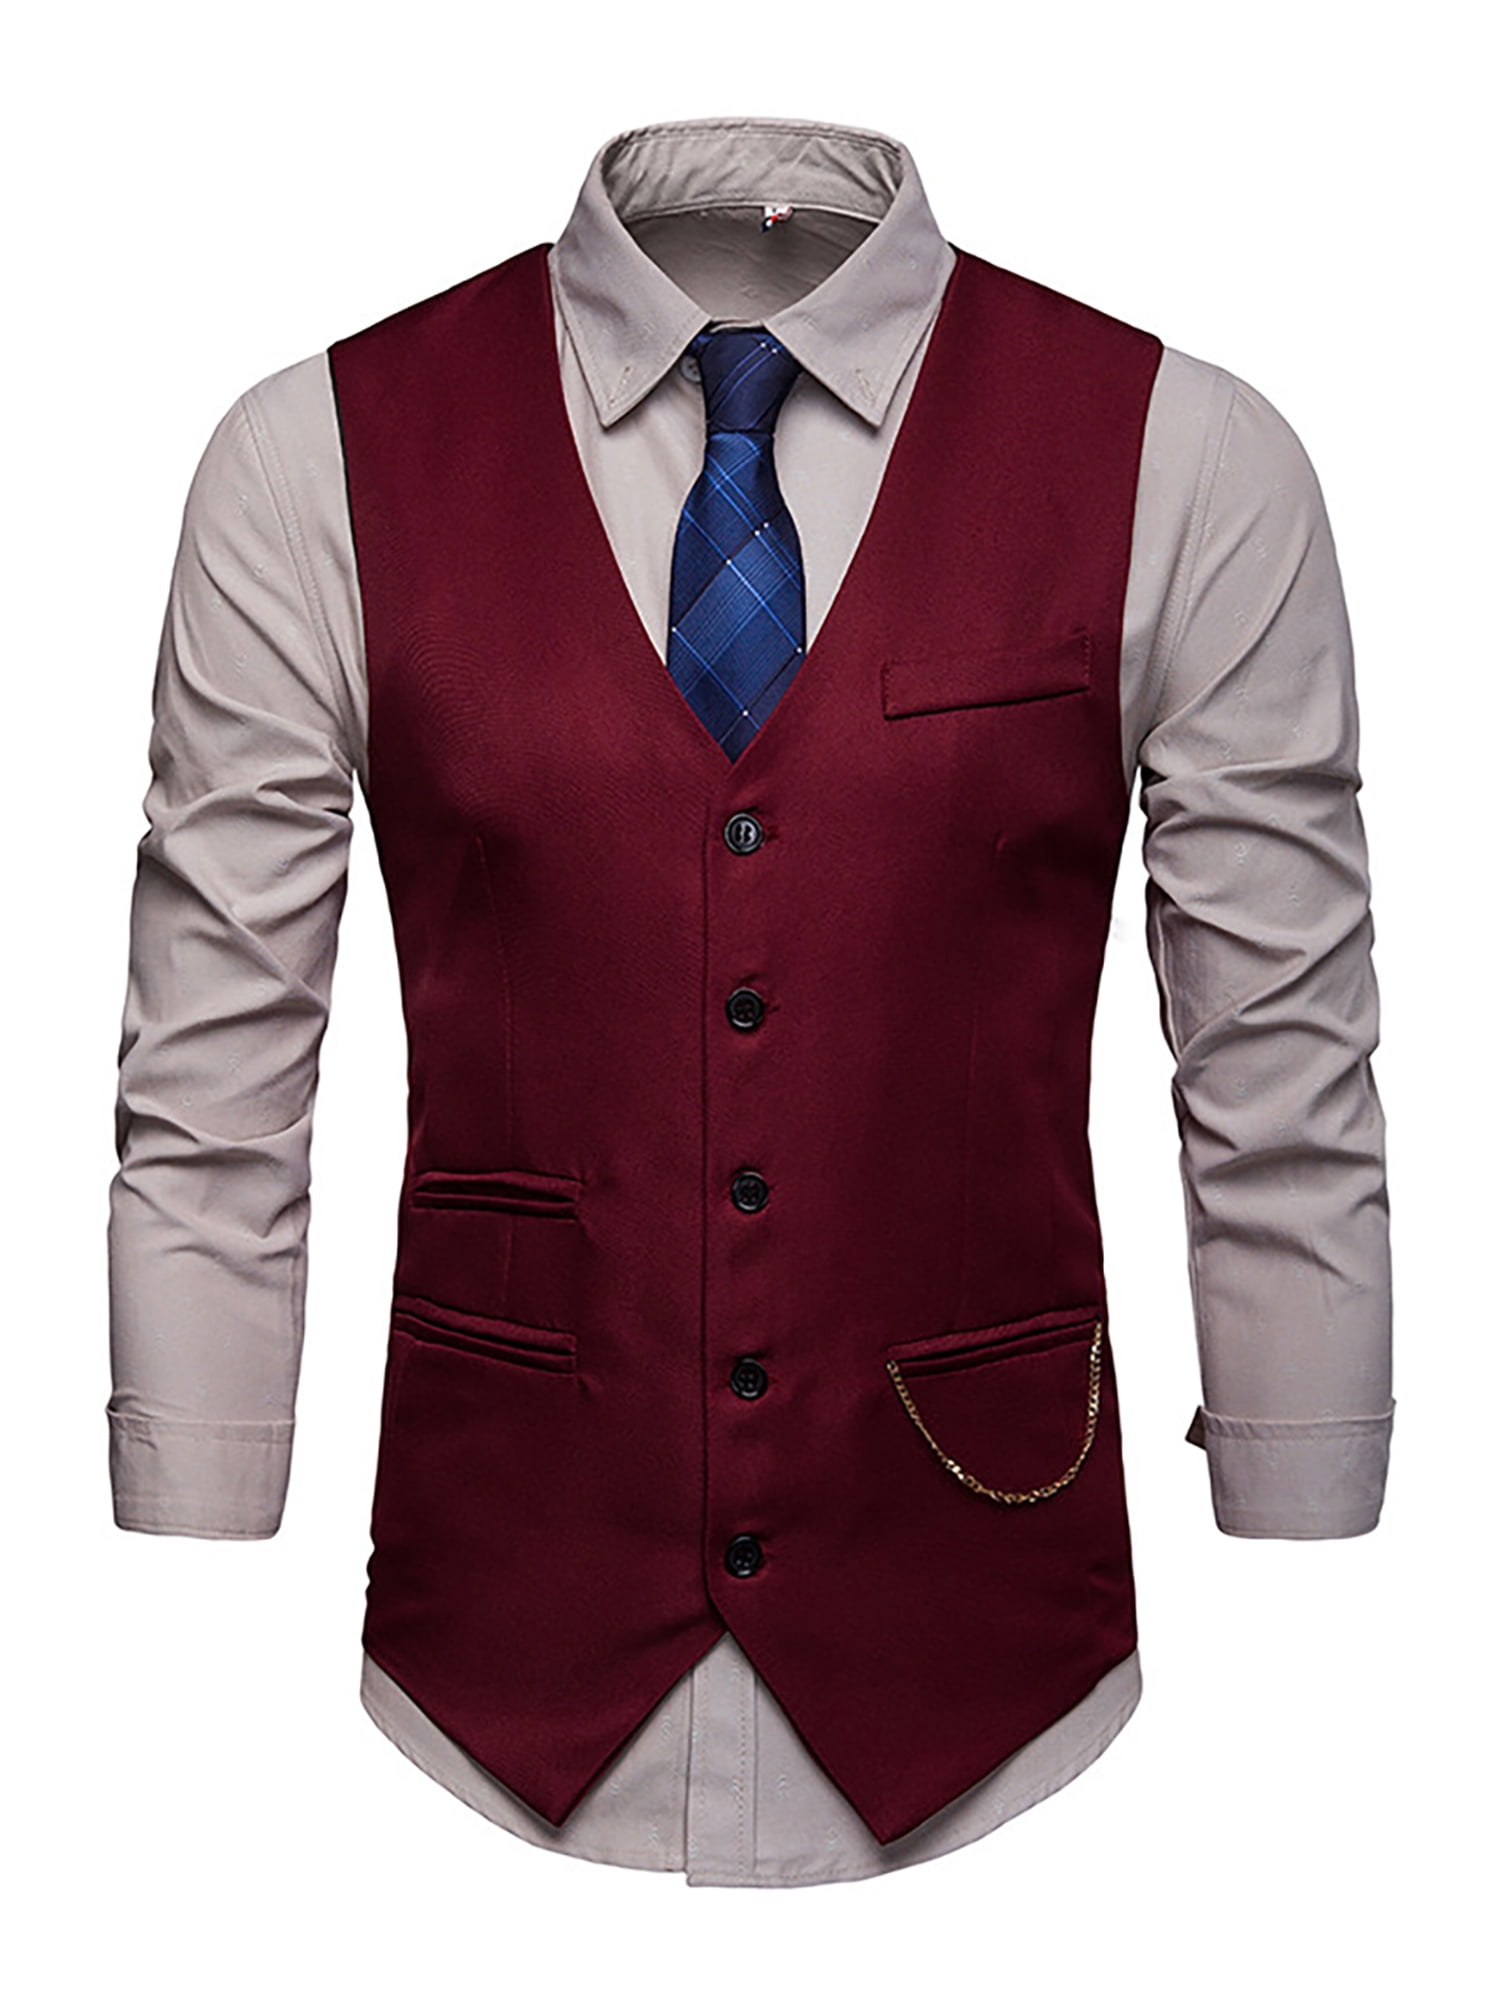 Mens Waistcoat Casual Slim Fit Skinny Formal Waistcoat Vest with Pocket for Wedding/Business/Party